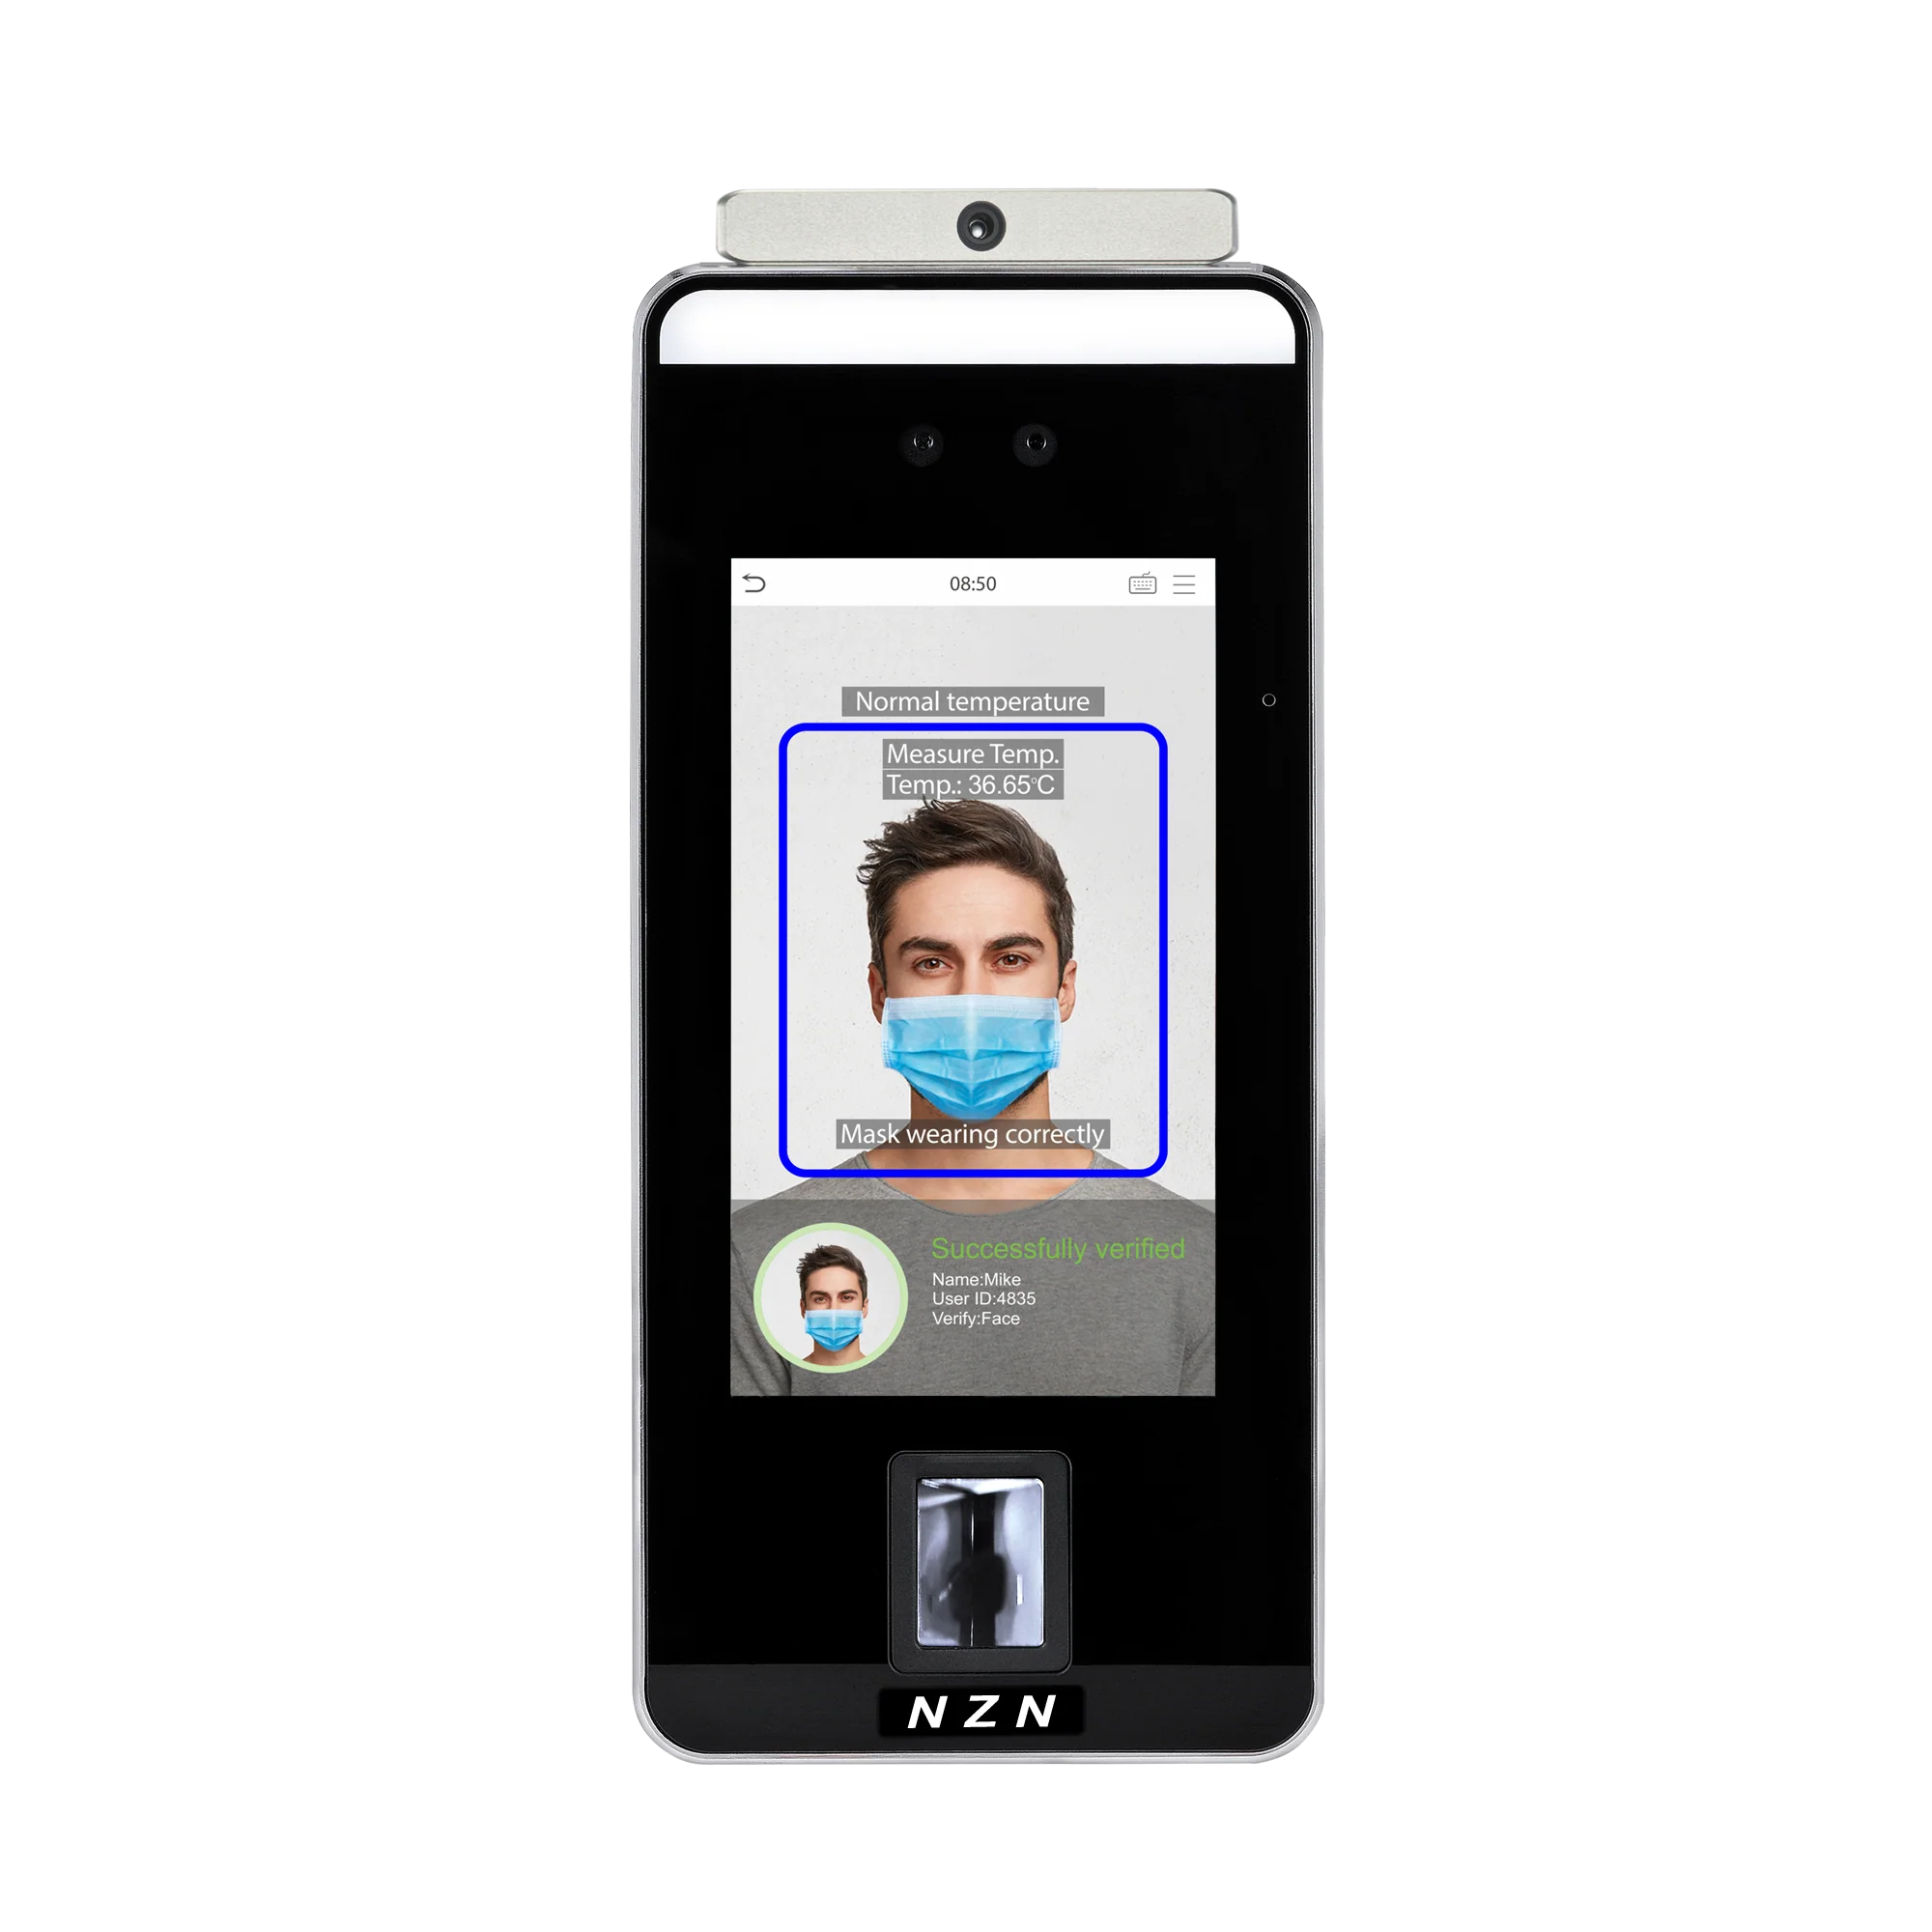 The Modern Application of Biometric Face Recognition